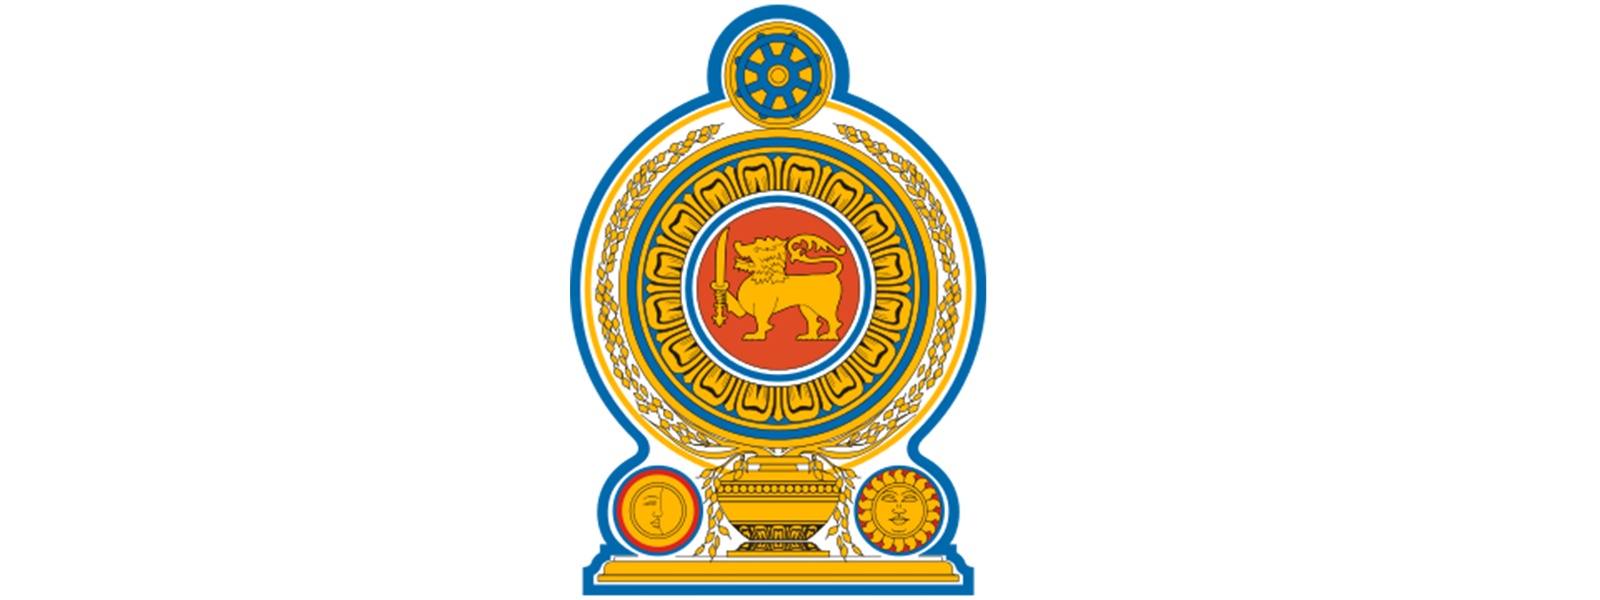 Kurunegala gets a new Mayor from the SJB